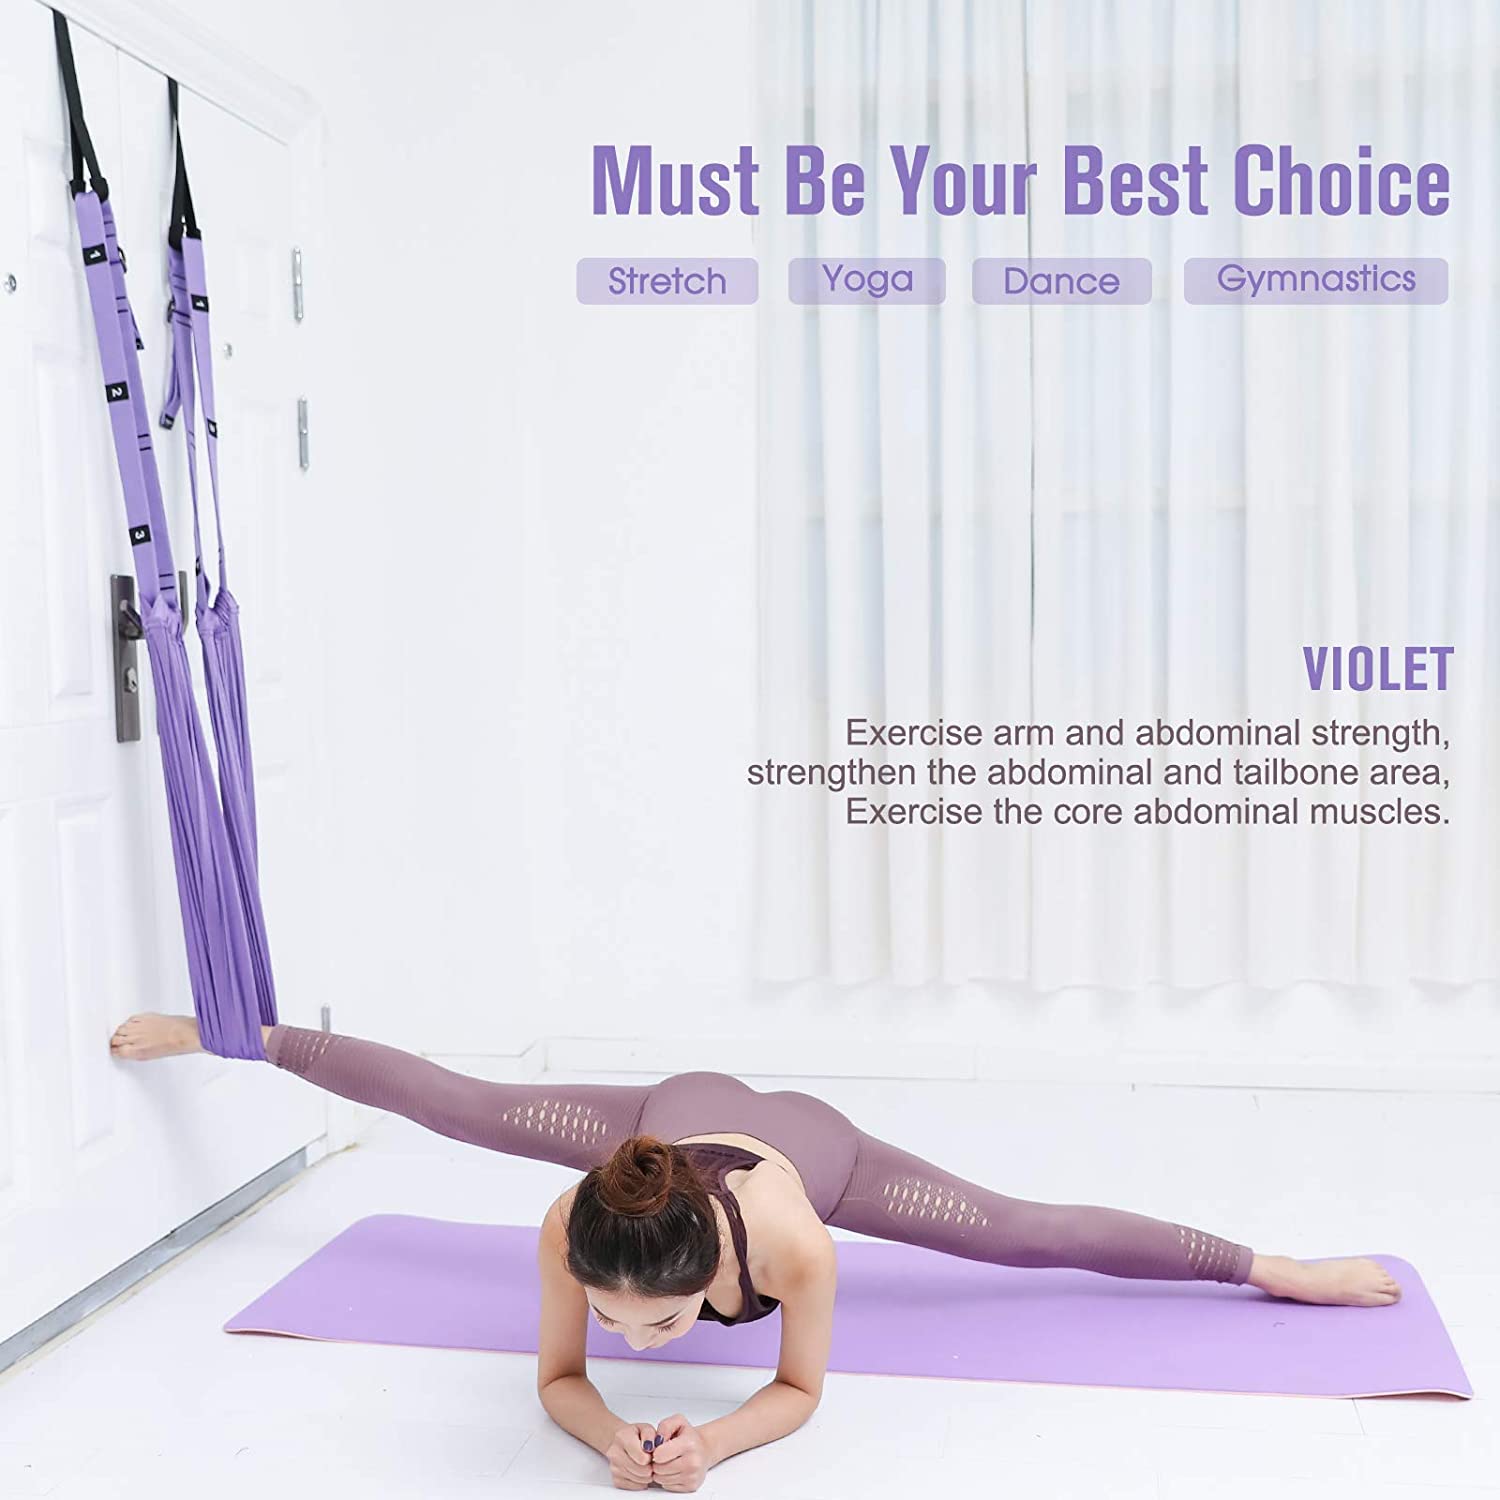 A very fit lady stretching with one foot in a violet yoga or gymnastics strap from a door torture type device very cool